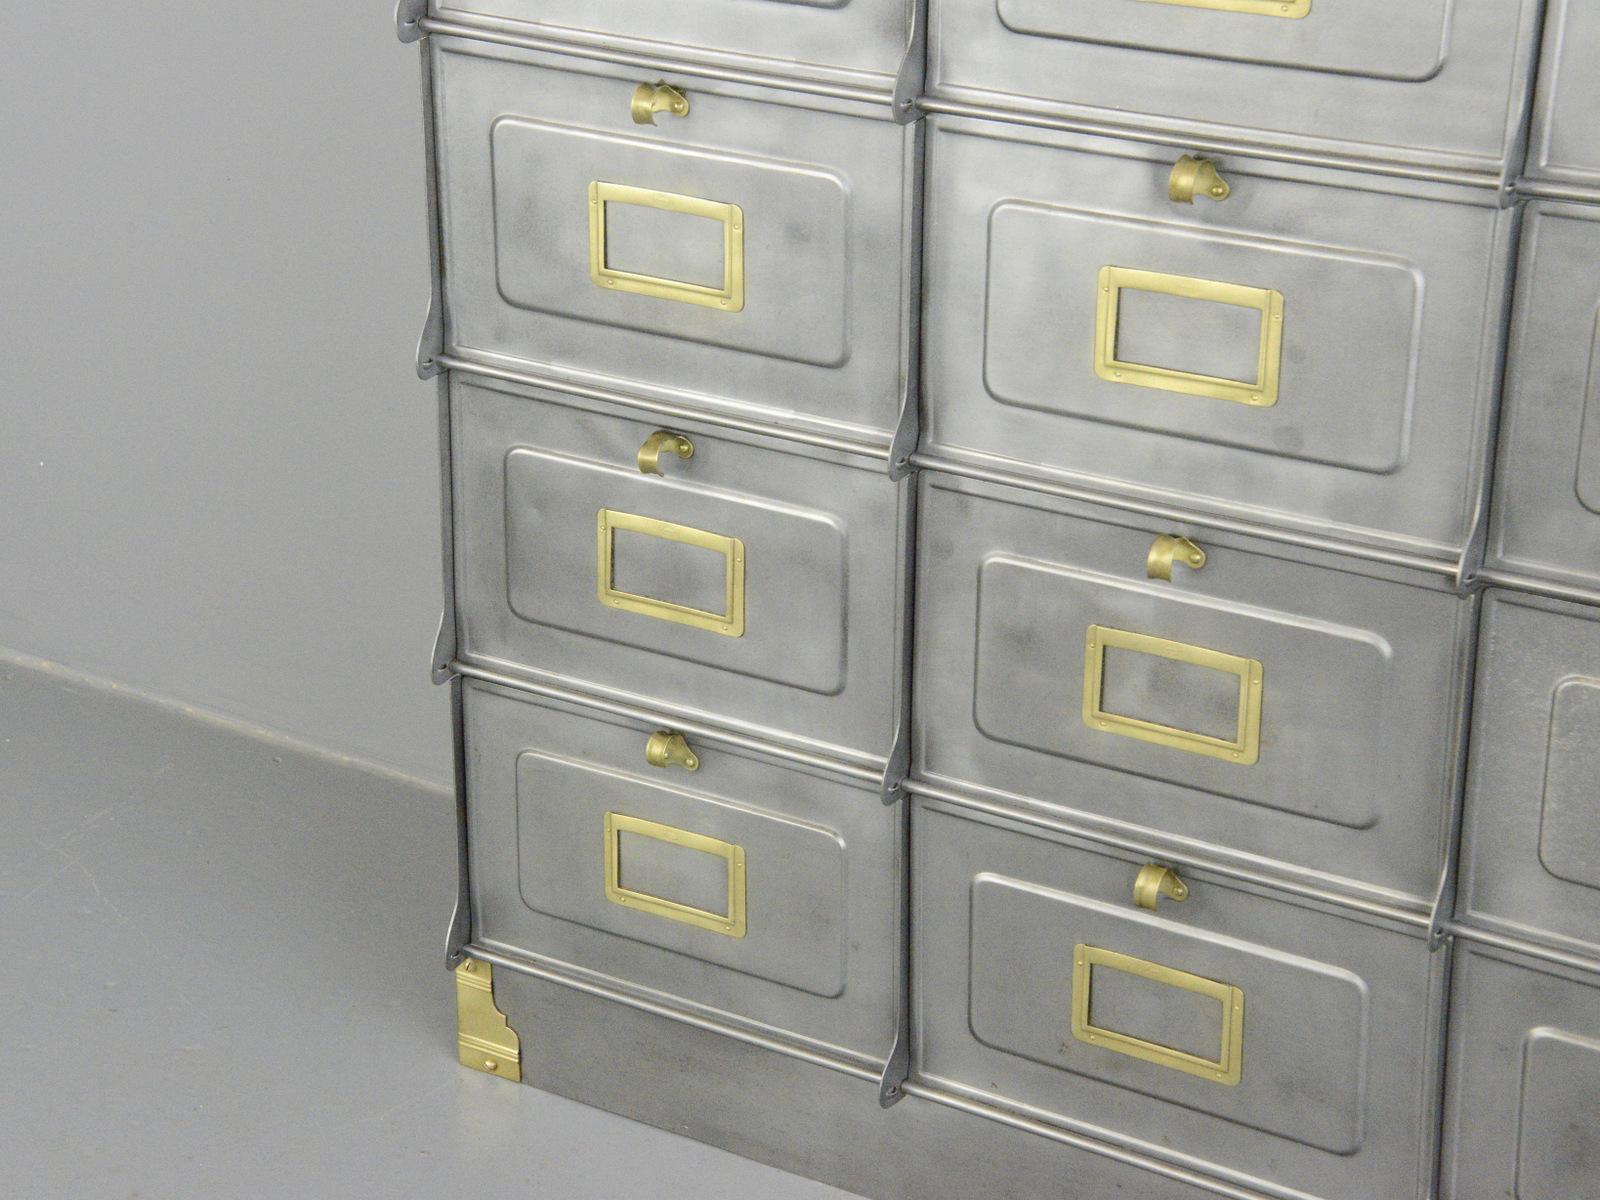 Strafor Clapets industrial cabinet, circa 1920s

- 21 pull down compartments
- Solid brass card holders each stamped 